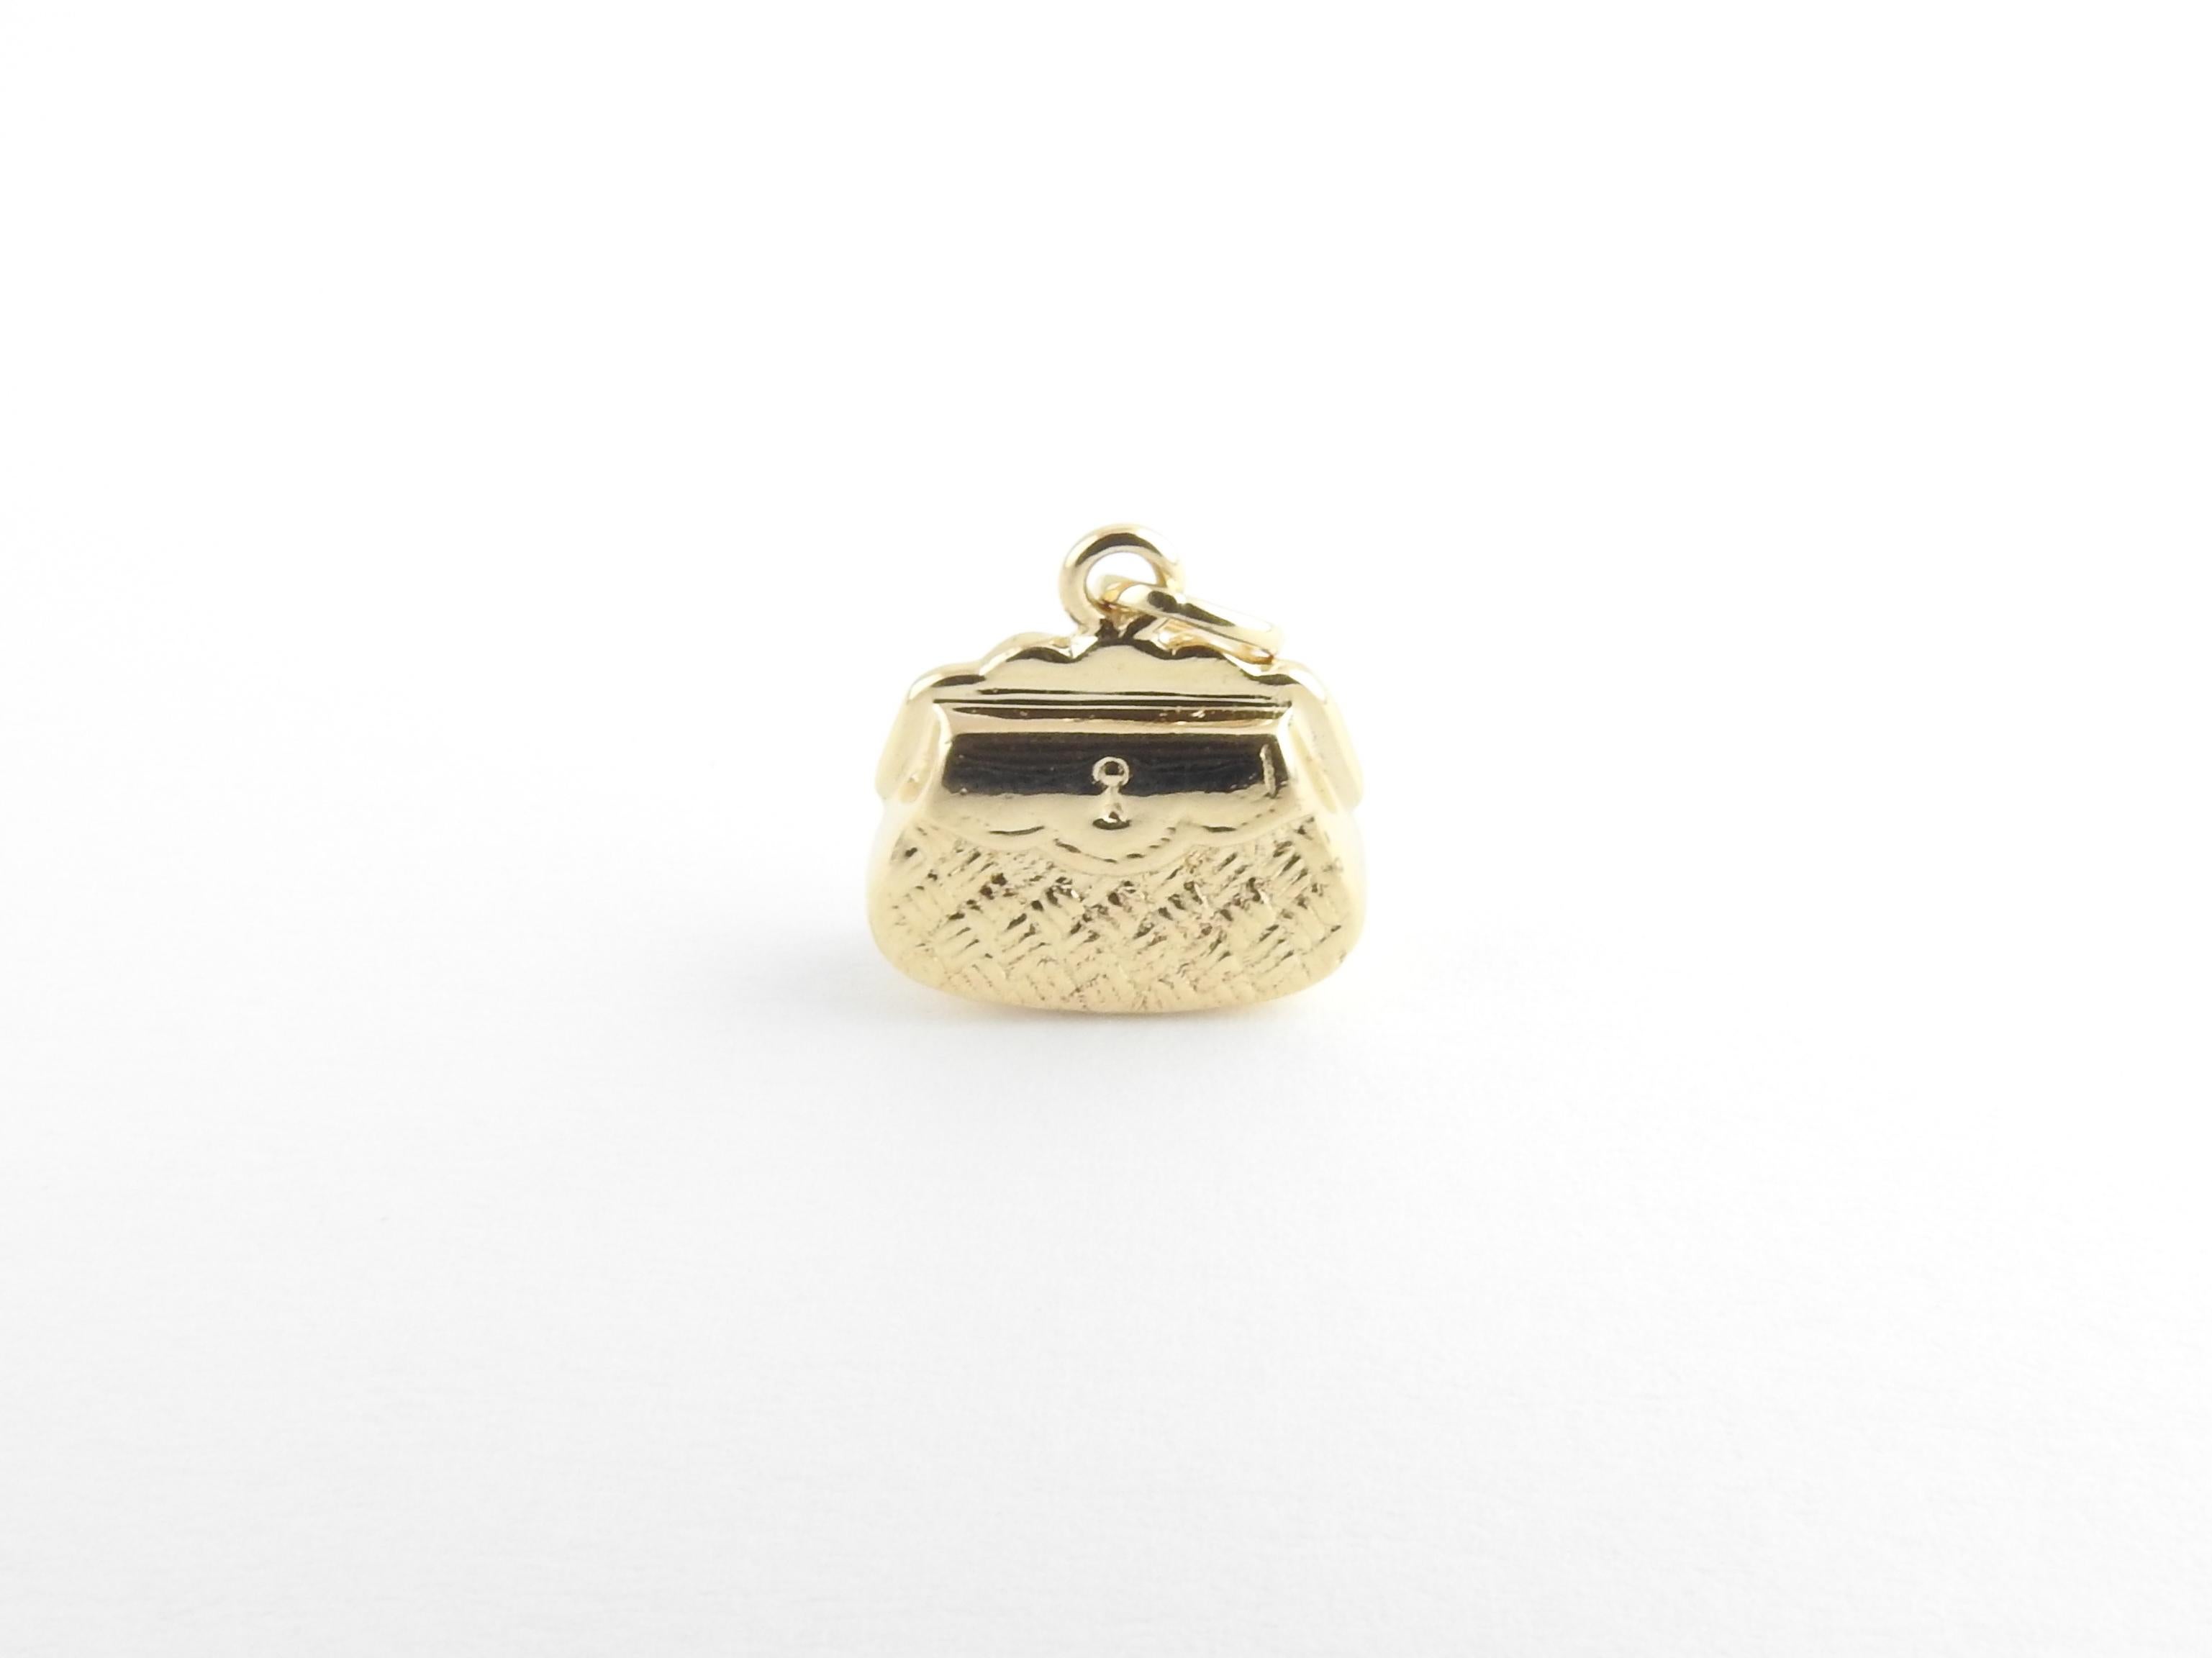 Vintage 14 Karat Yellow Gold Handbag Charm

Perfect for the fashionista!

This lovely 3D charm features a miniature handbag meticulously detailed in 14K yellow gold.

Size: 15 mm x 15 mm (actual charm)

Weight: 5.1 dwt. / 8.0 gr.

Acid tested for